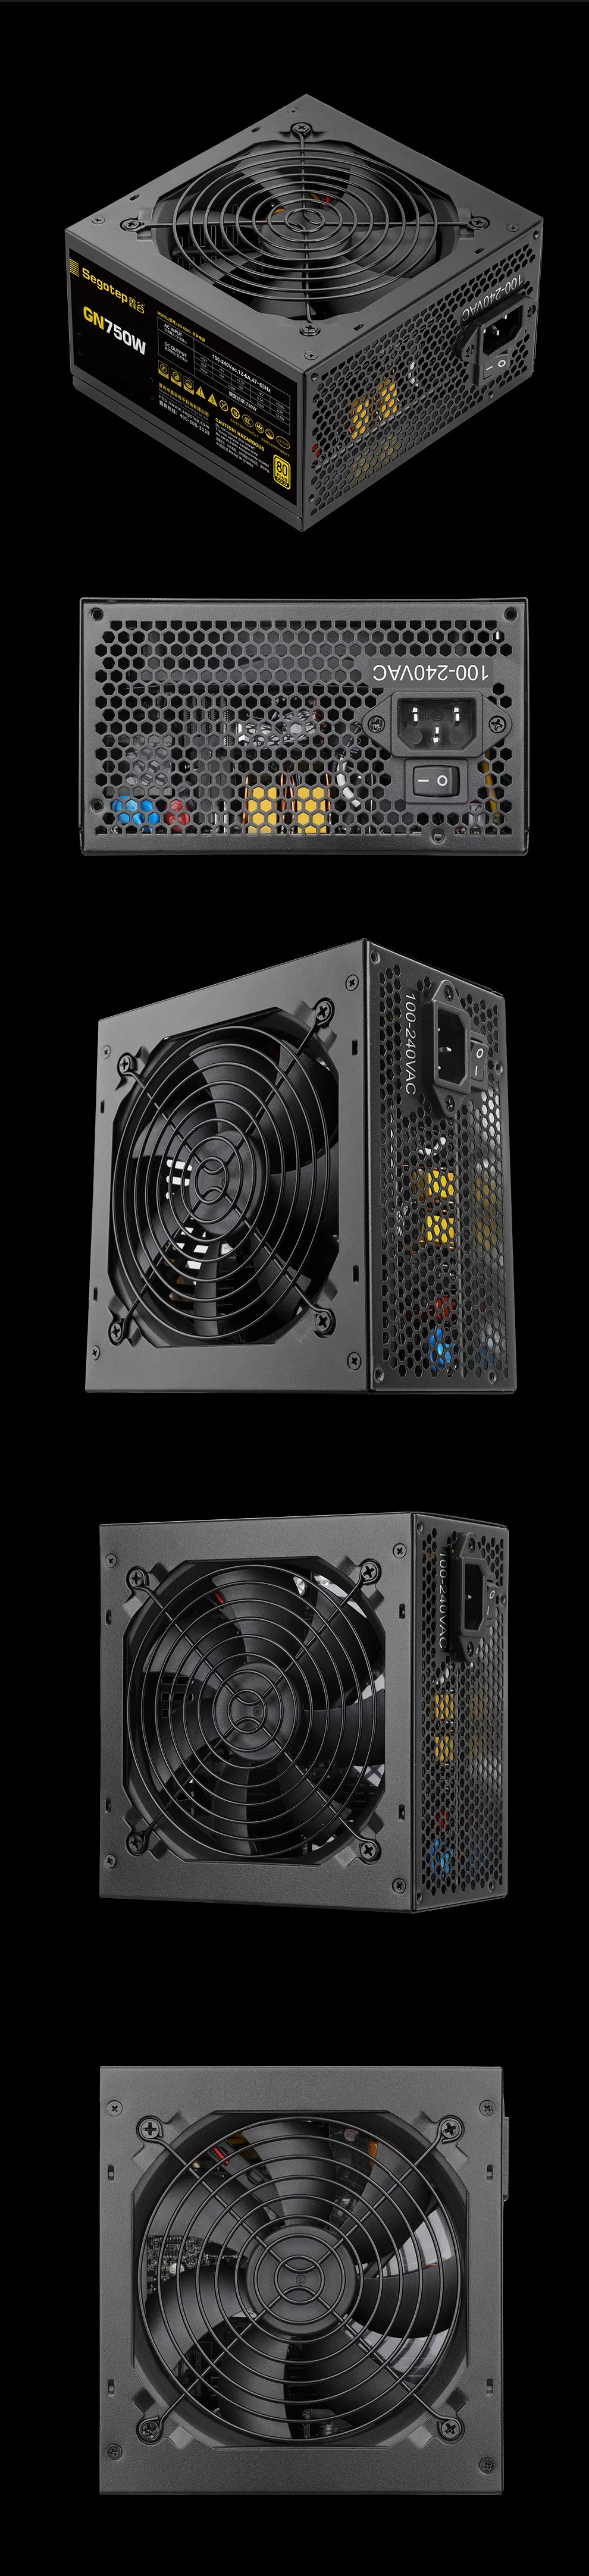 with 120mm Hydraulic Bearing Fan, Active Pfc 80 Plus Gold DC-DC Circuit 650W 750W 850W ATX Computer Power Supply